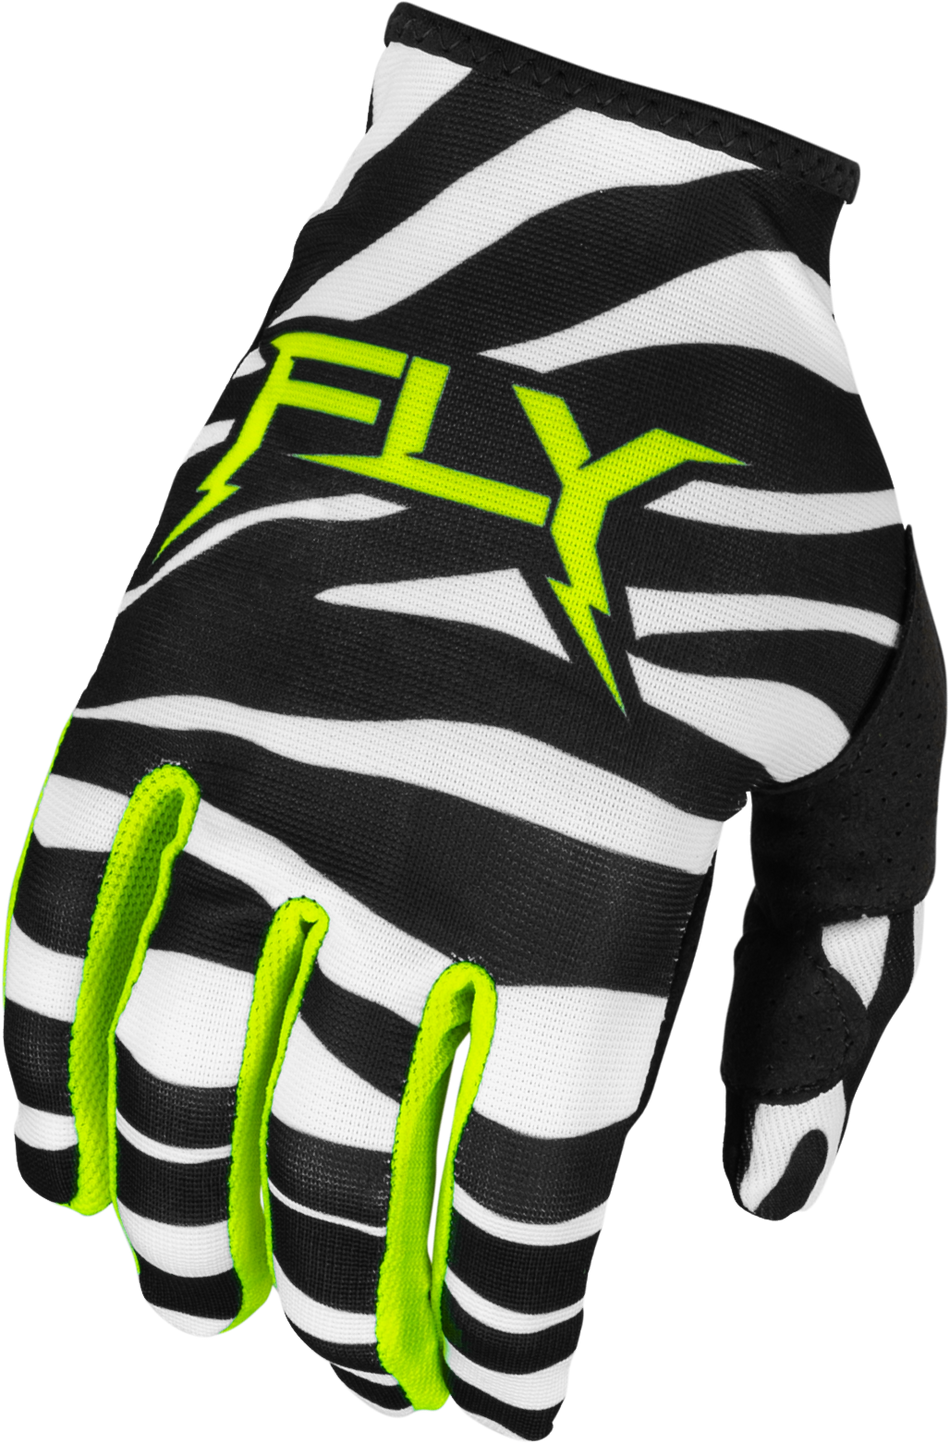 FLY RACING Youth Lite Uncaged Gloves Black/White/Neon Green Ys 377-742YS